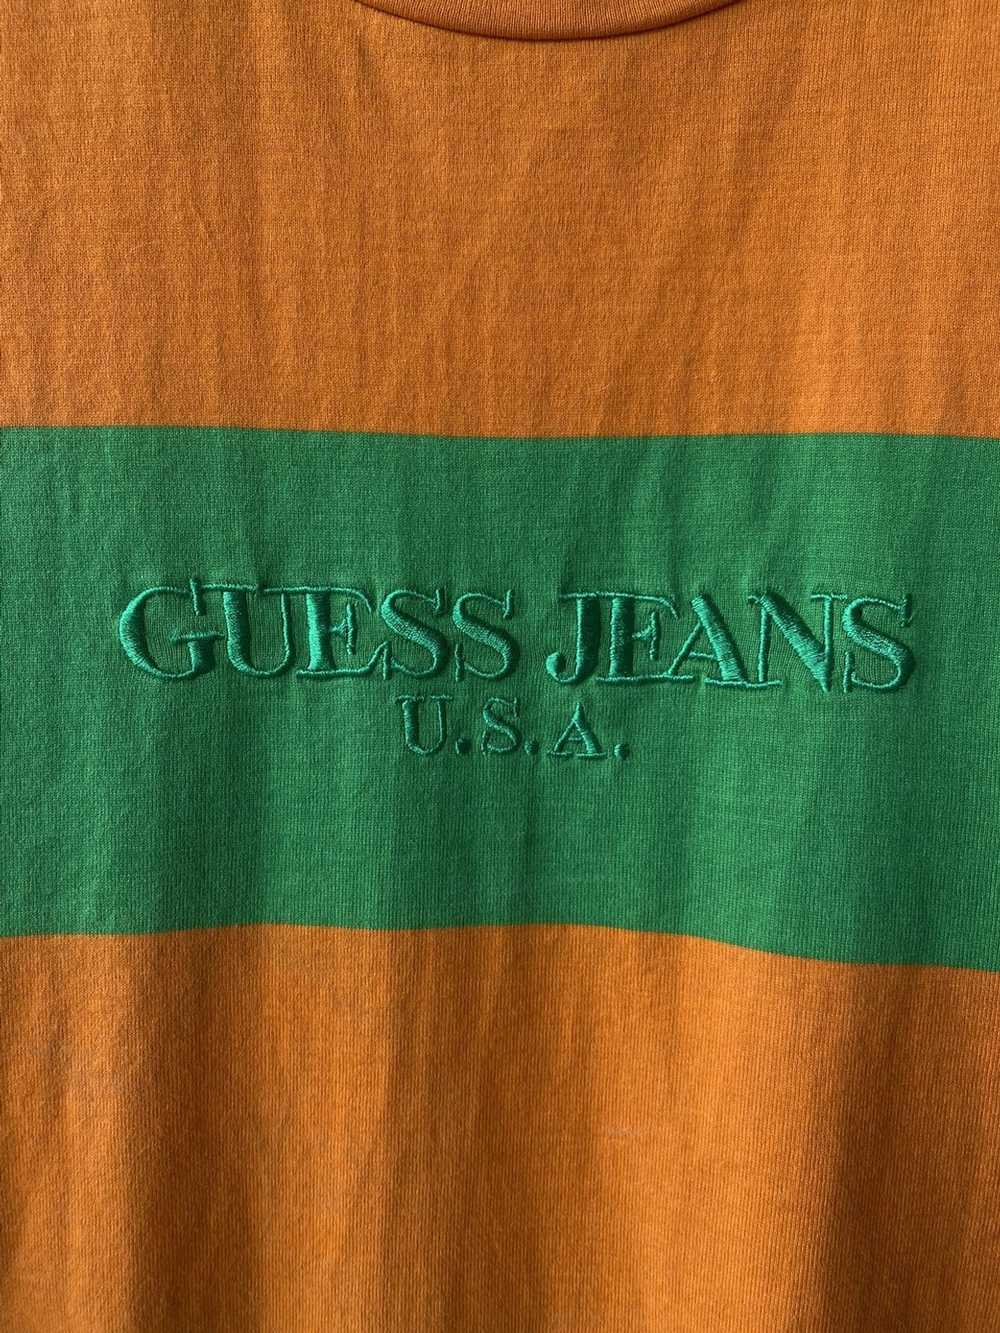 Guess × Streetwear Guess X Sean Wotherspoon Tshirt - image 3